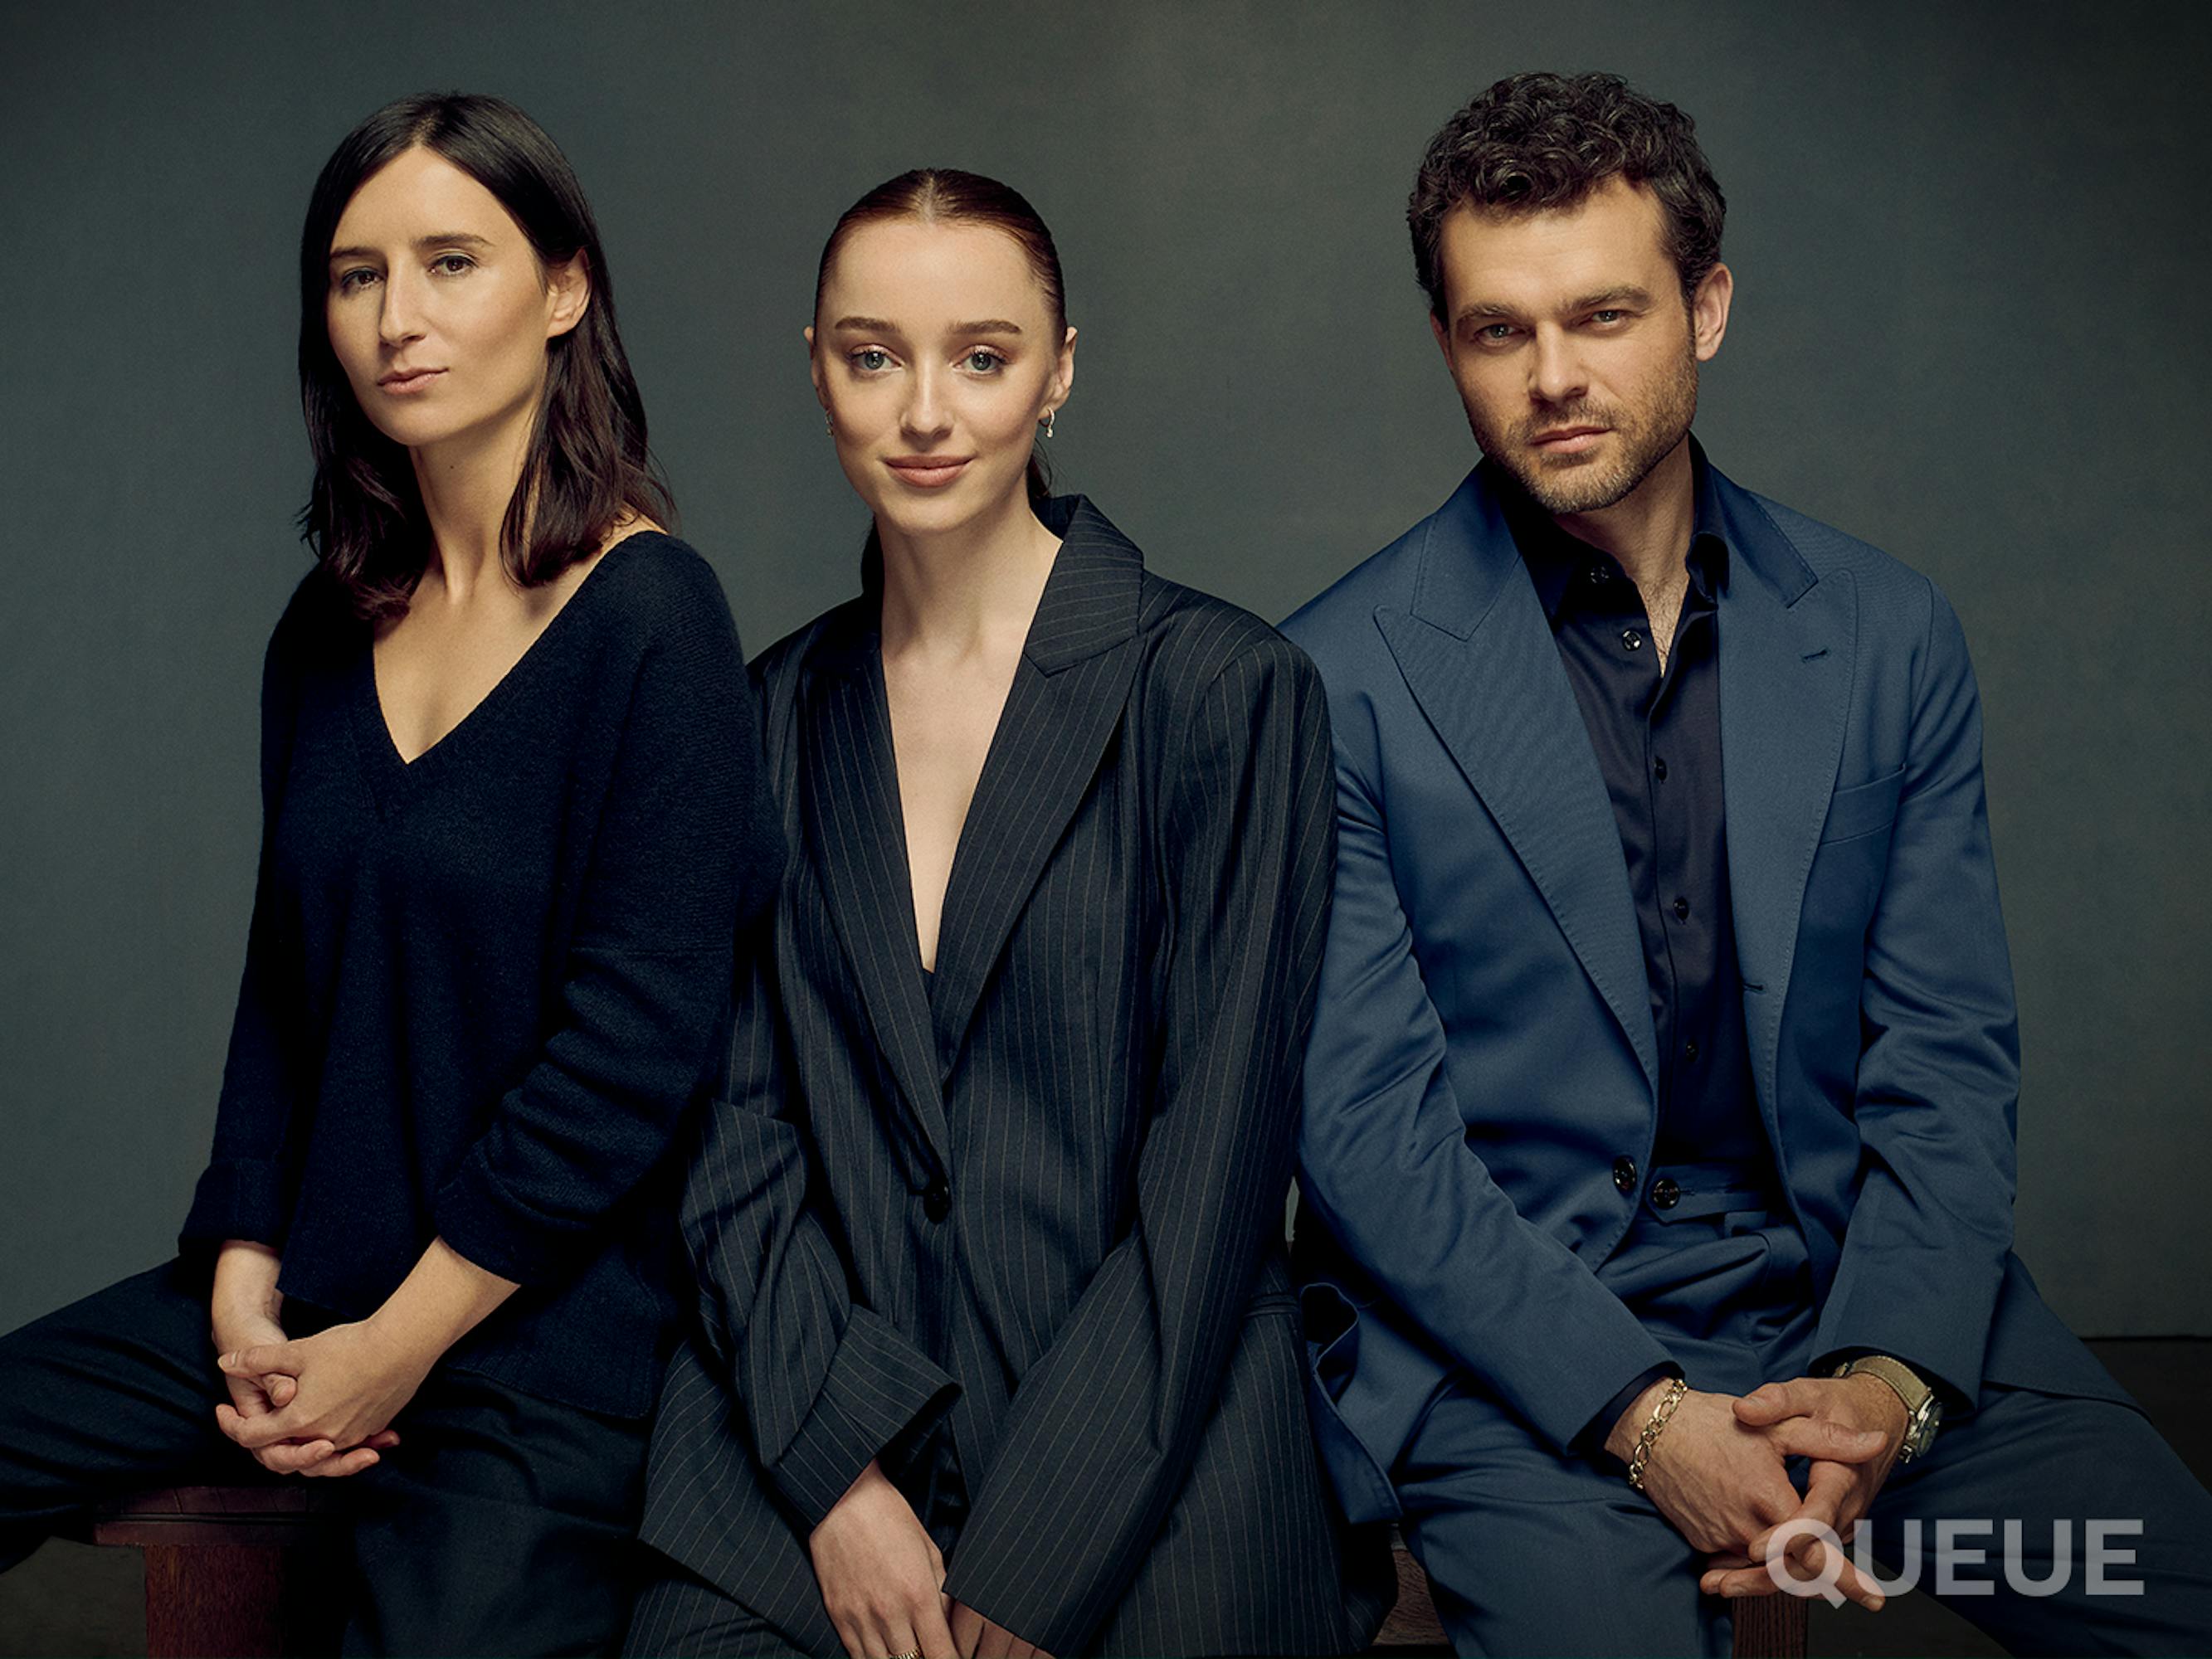 Chloe Domont, Phoebe Dynevor, and Alden Ehrenreich stand together not smiling. Chloe wears a V-neck shirt, Phoebe wears a black pinstripe suit and Alden wears a navy suit.